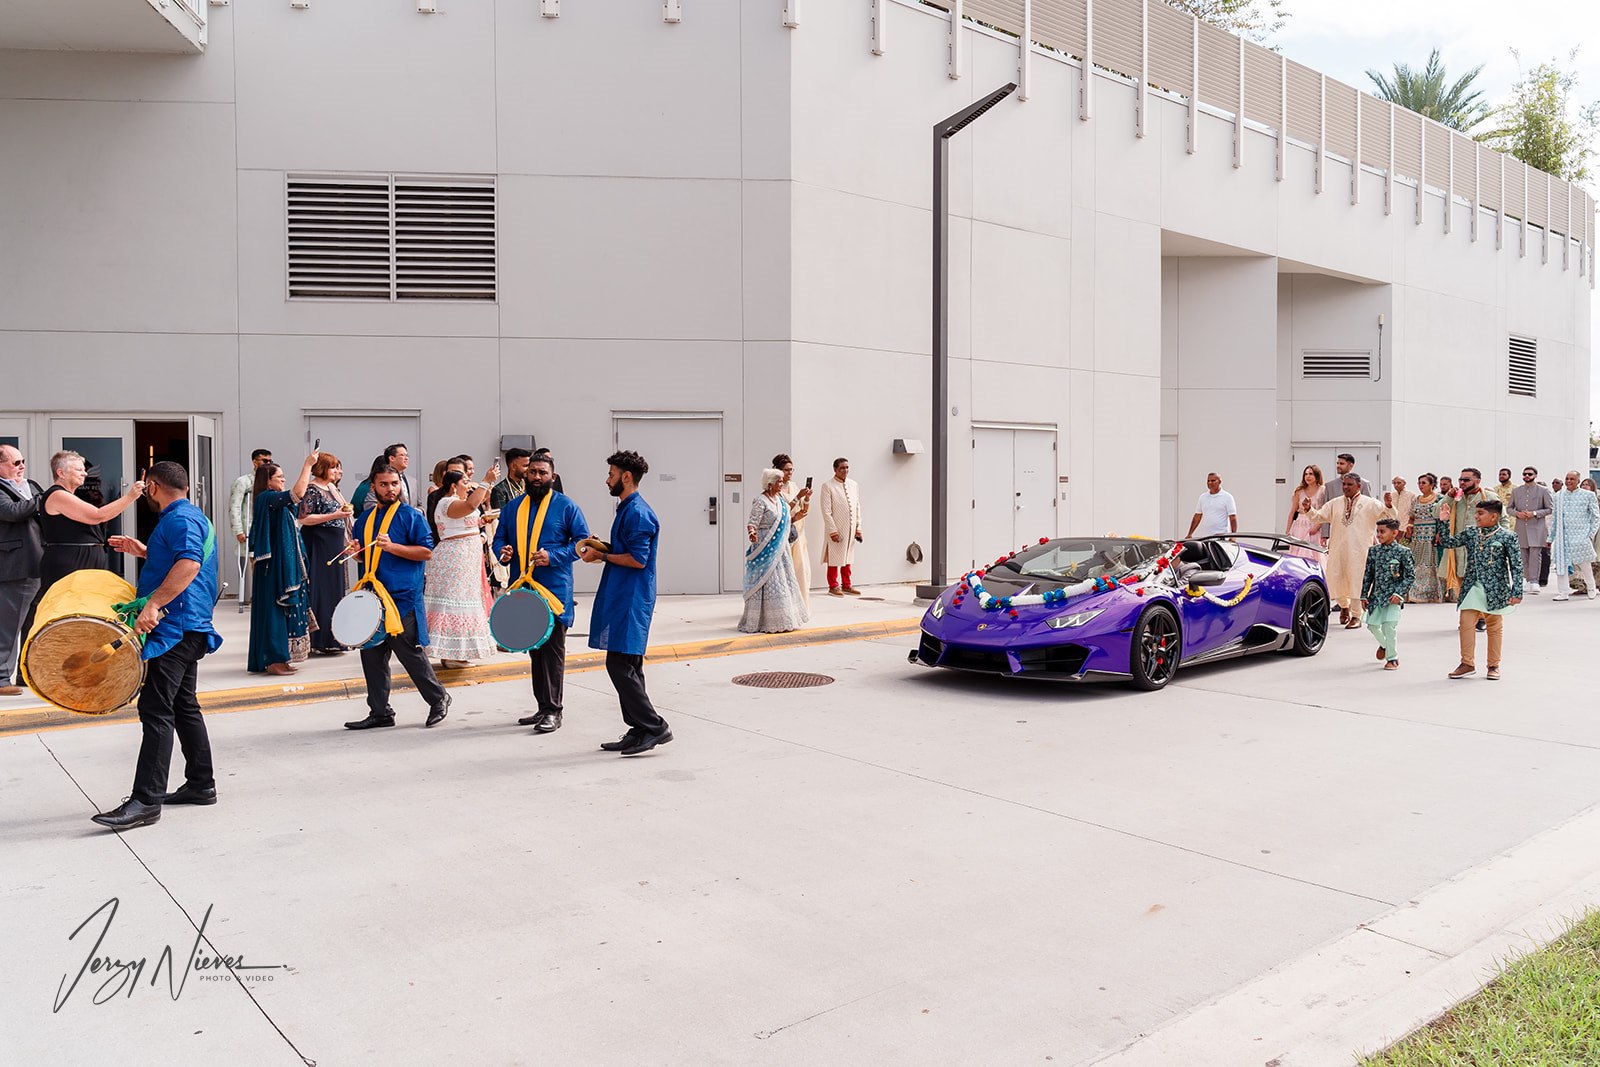 Wide shot of the parade procession with the band leading the Lamborghini and the wedding party walking behind it.